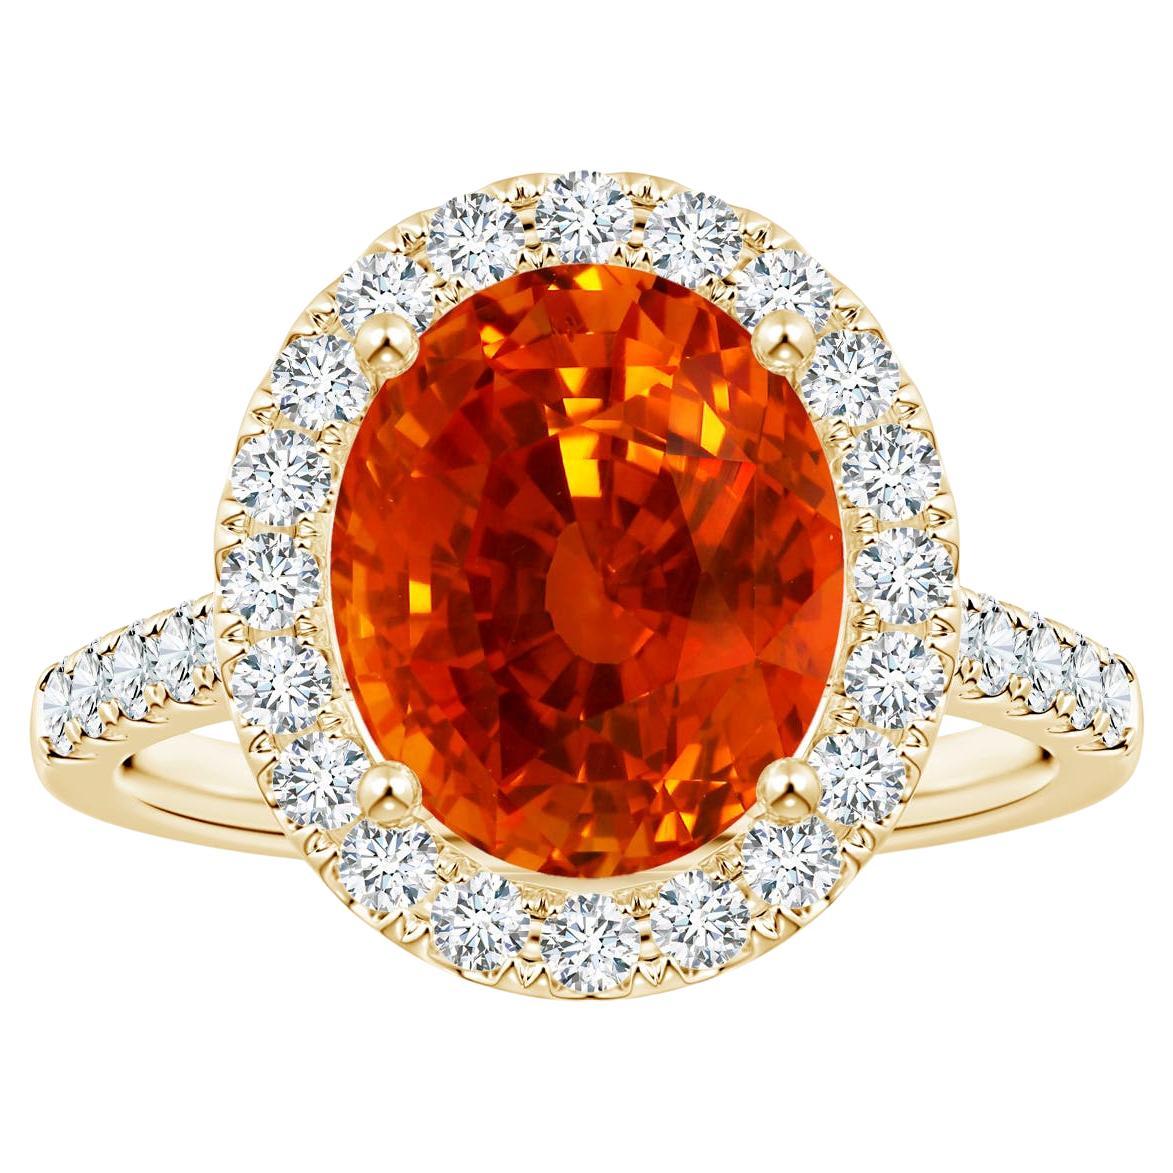 For Sale:  Angara Gia Certified Natural Orange Sapphire Diamond Halo Ring in Yellow Gold